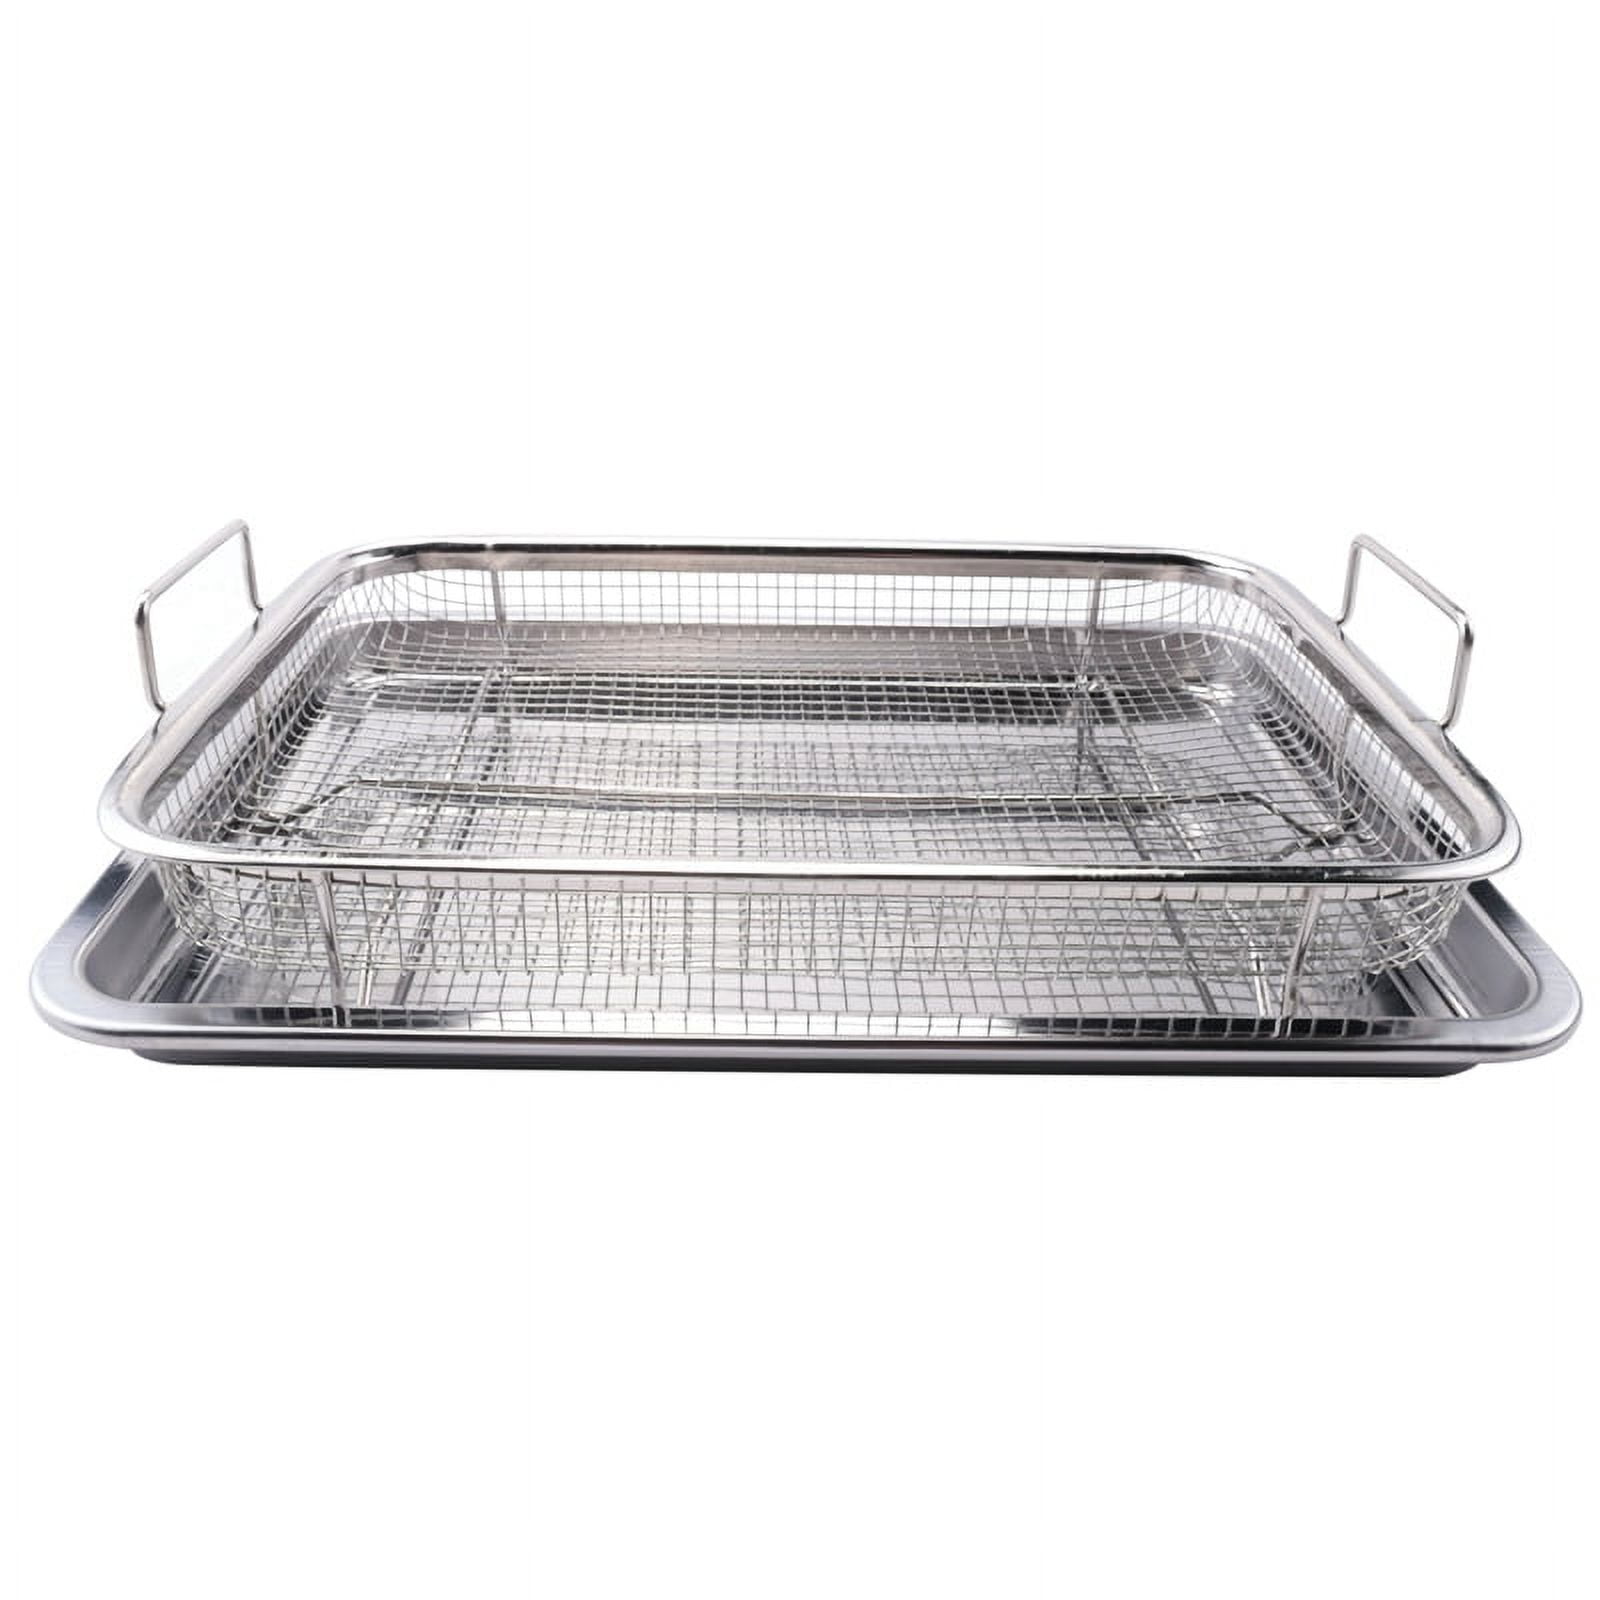 Festzon Oven Basket and Tray Set, 15.6”*11.6” Air Fryer Basket for Oven,Extra Large Stainless Steel, 2 Piece Air Fryer Pan,Air Fryer Accessories,Air